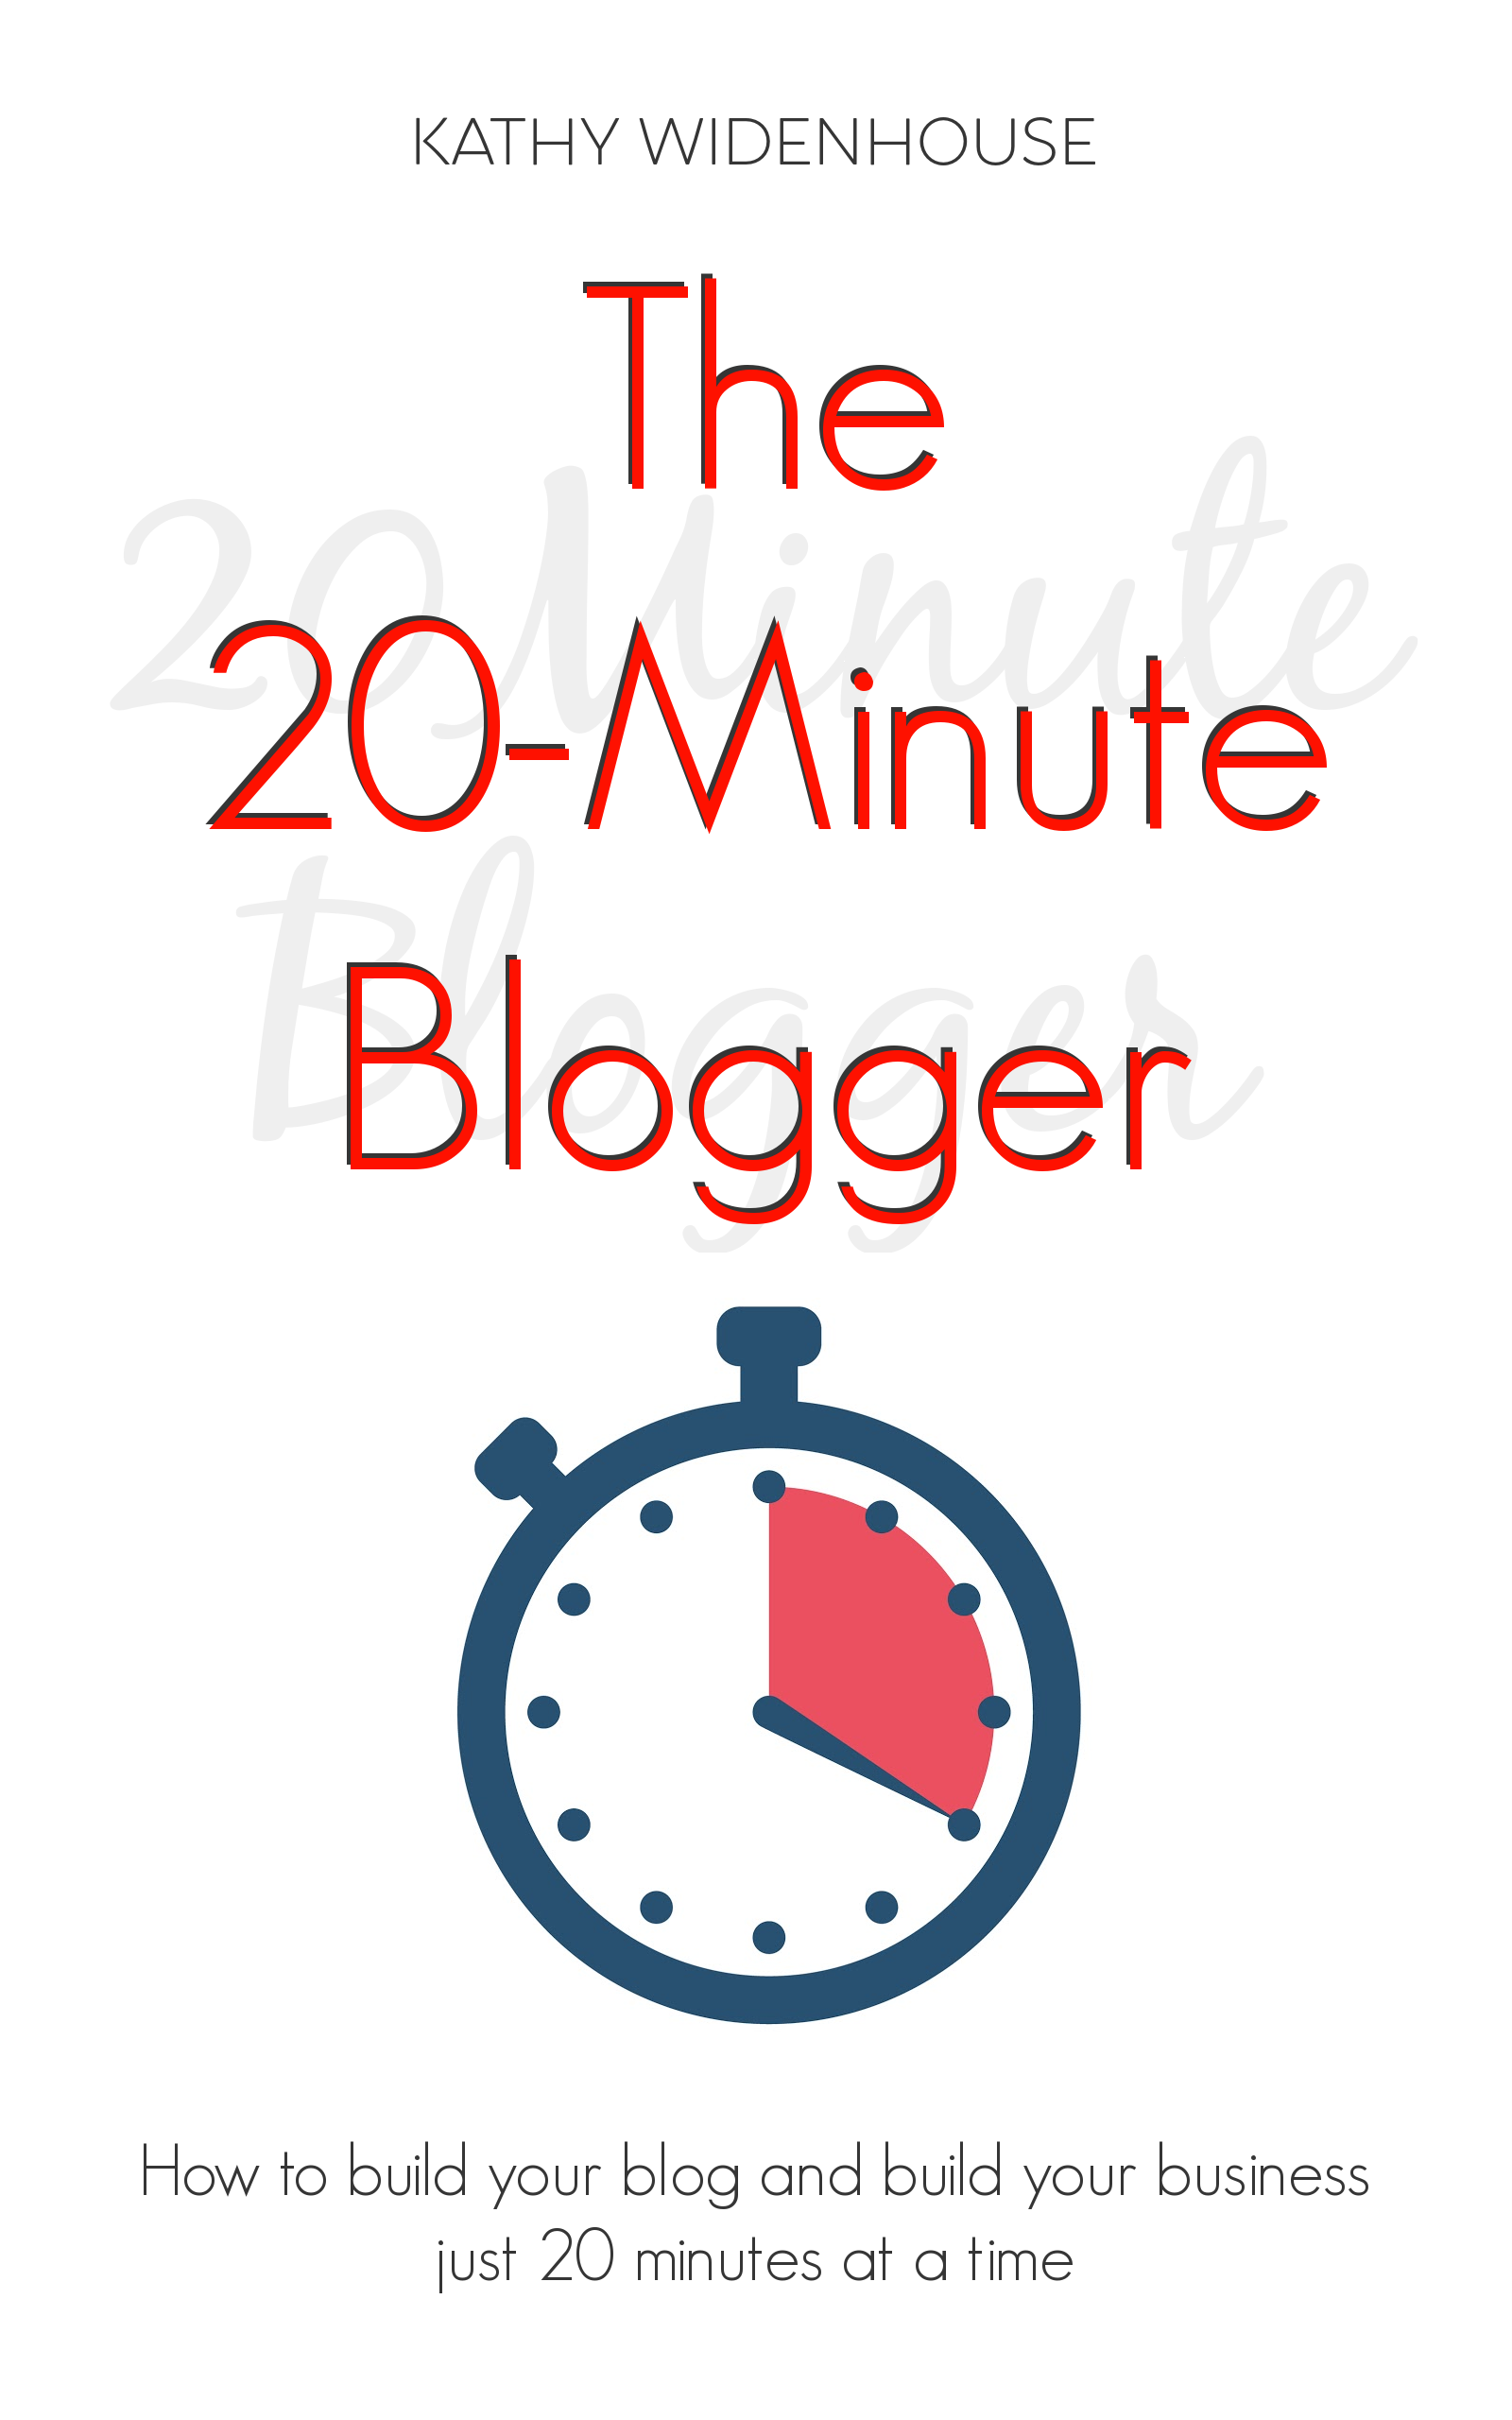 FREE: The 20-Minute Blogger: How to build your blog and build your business just 20 minutes at a time by Kathy Widenhouse